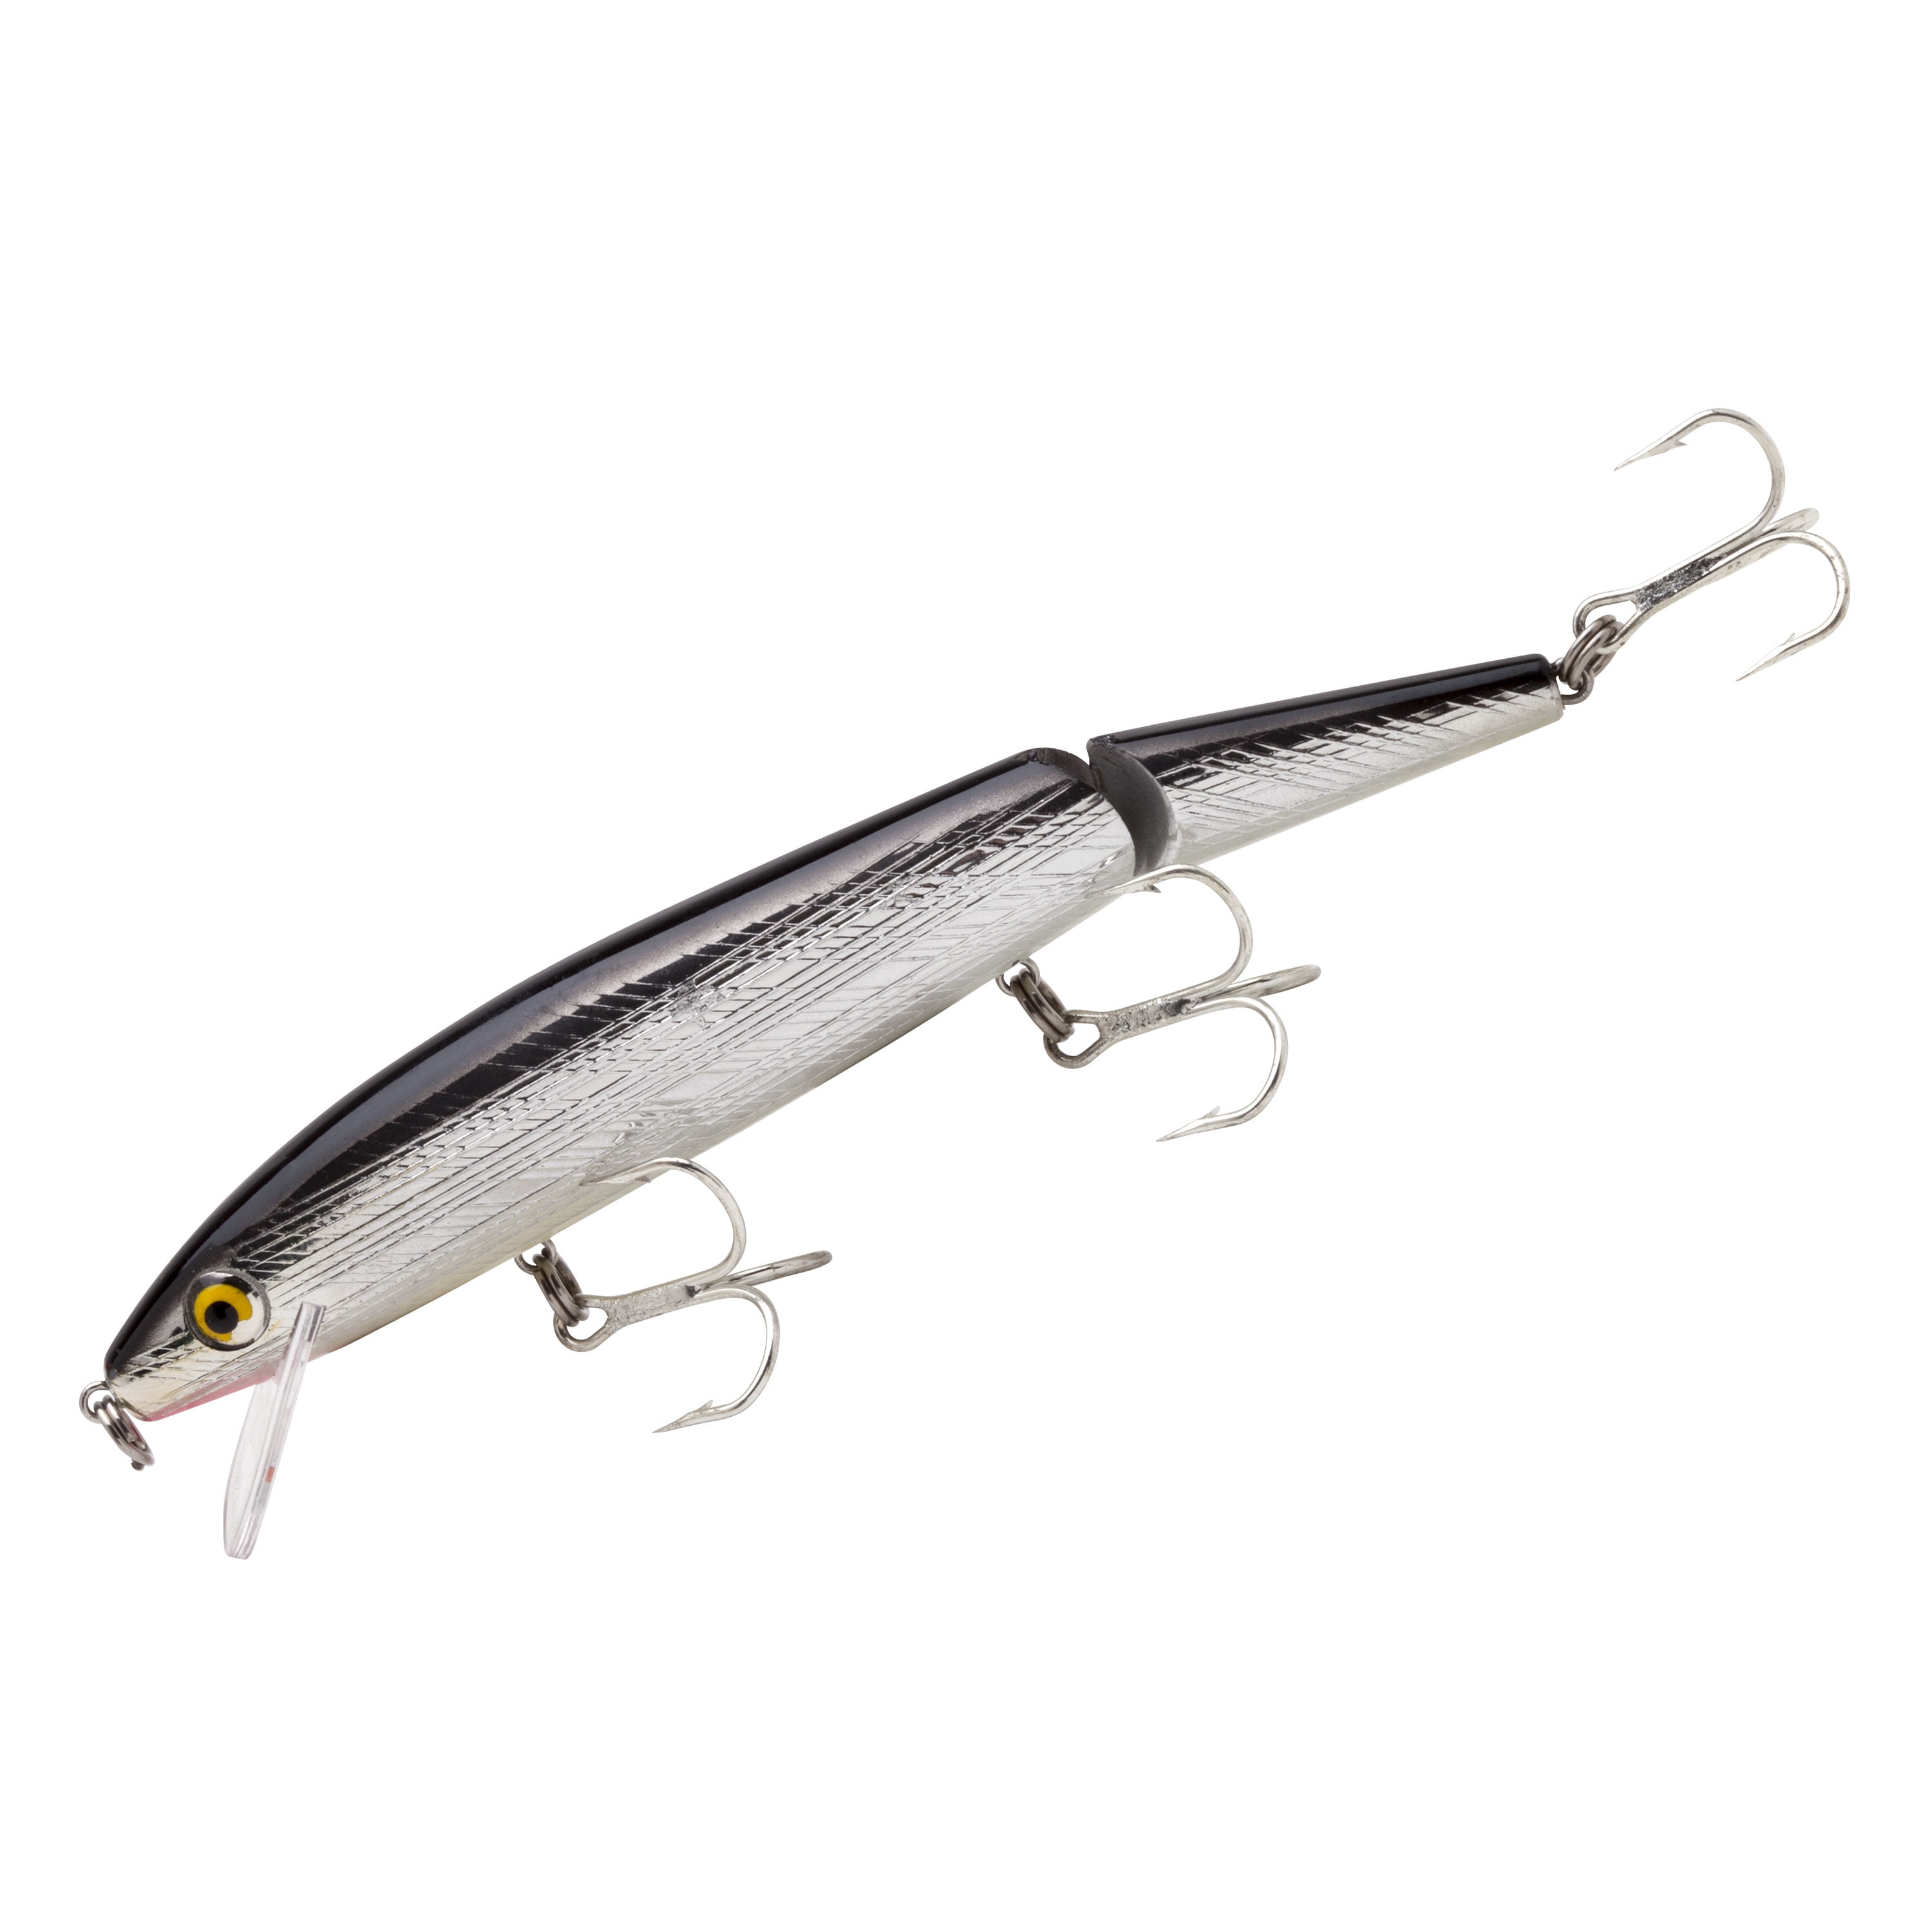 NEW 2 1/2 in J5001 Silver/Black Rebel Jointed Minnow Fishing Lure